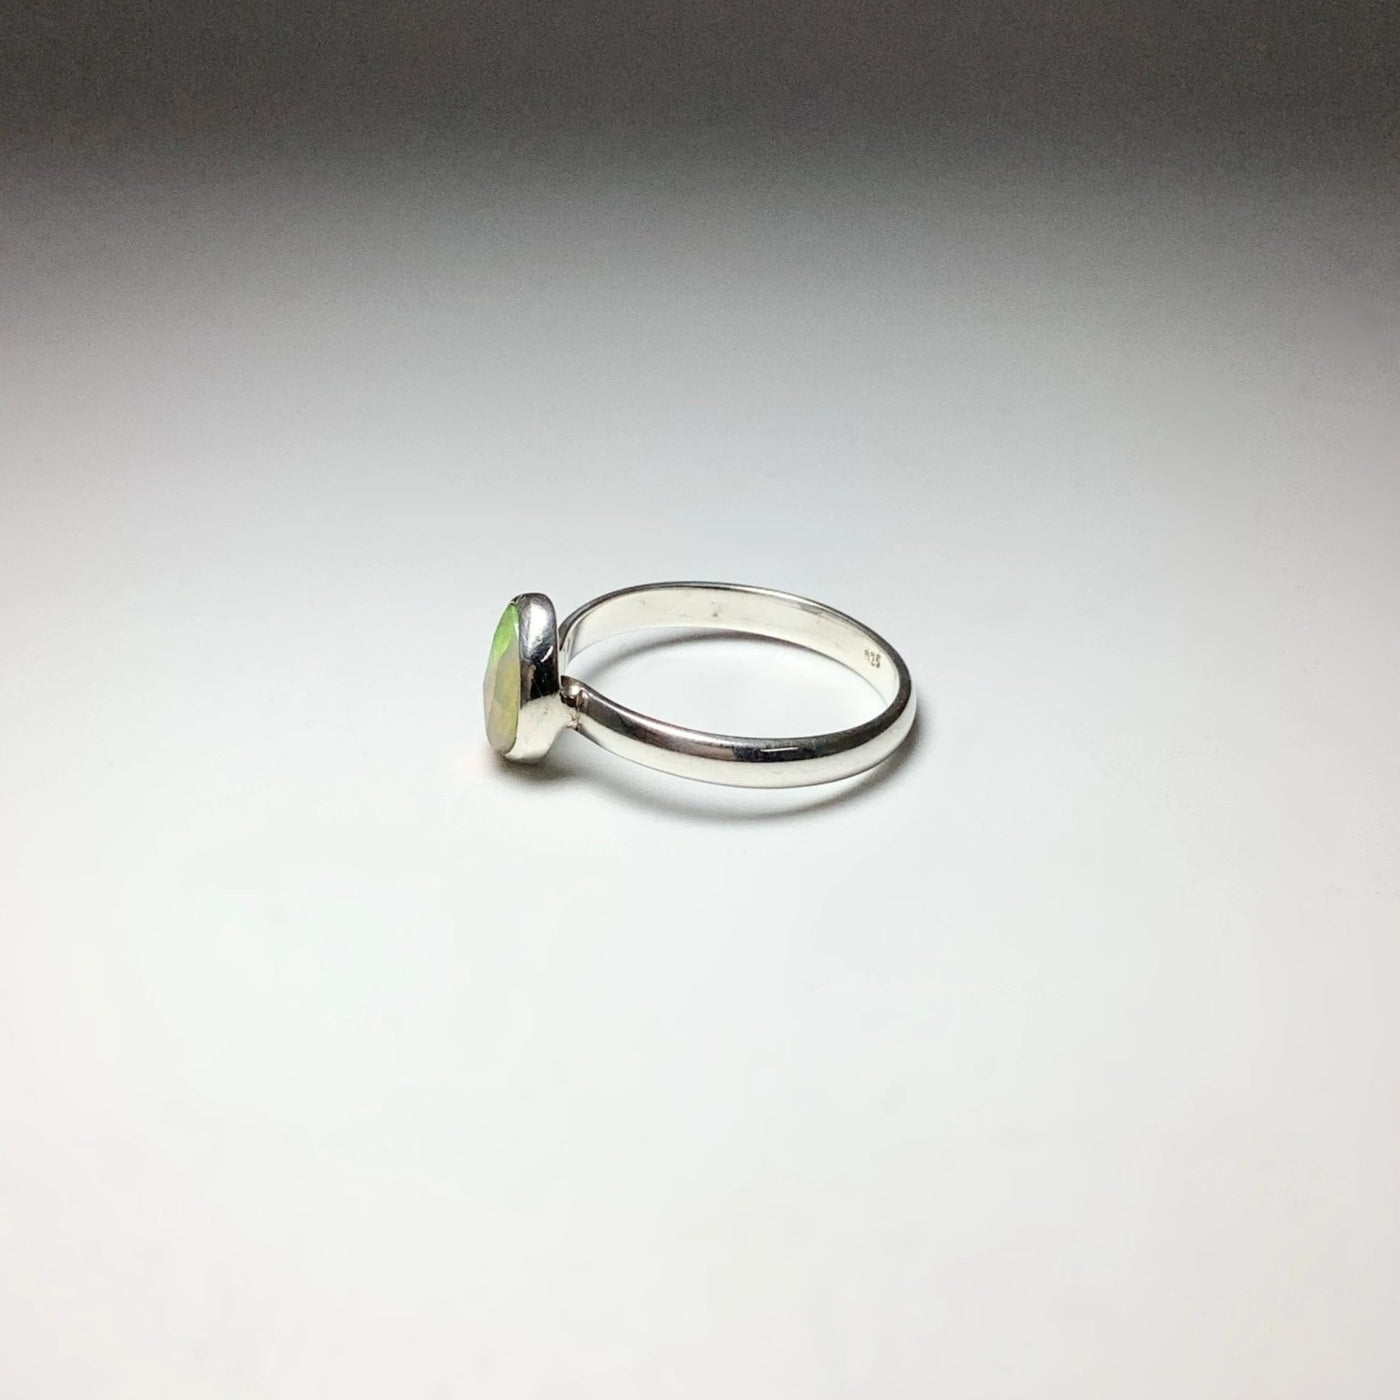 Faceted Ethiopian Fire Opal Ring